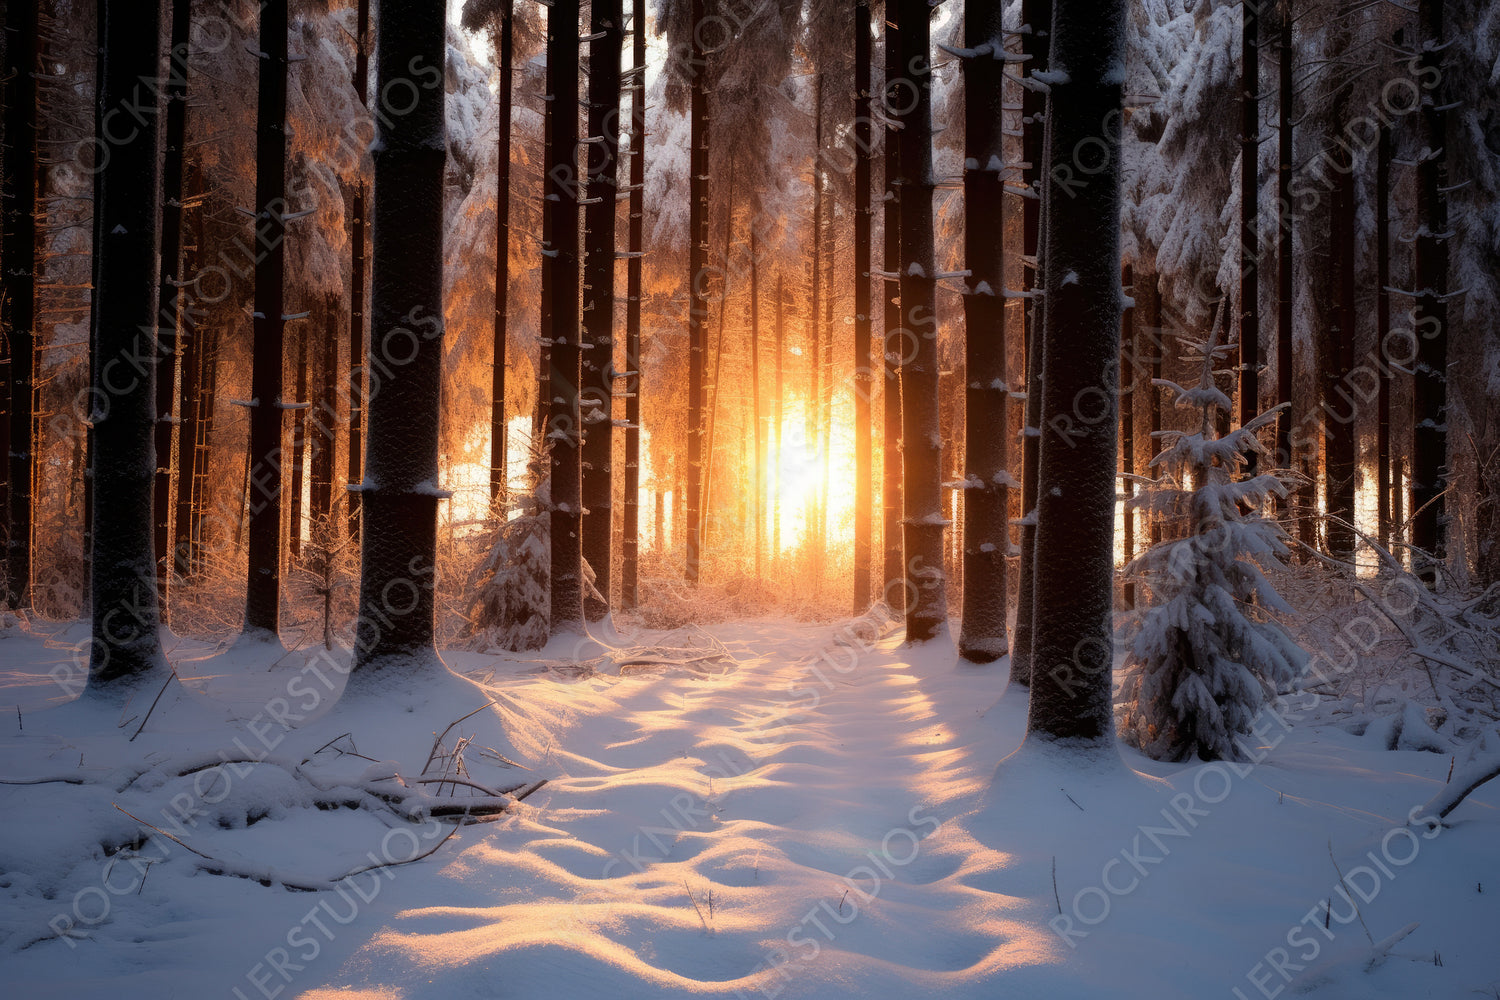 Sunset in The Wood in Winter Period